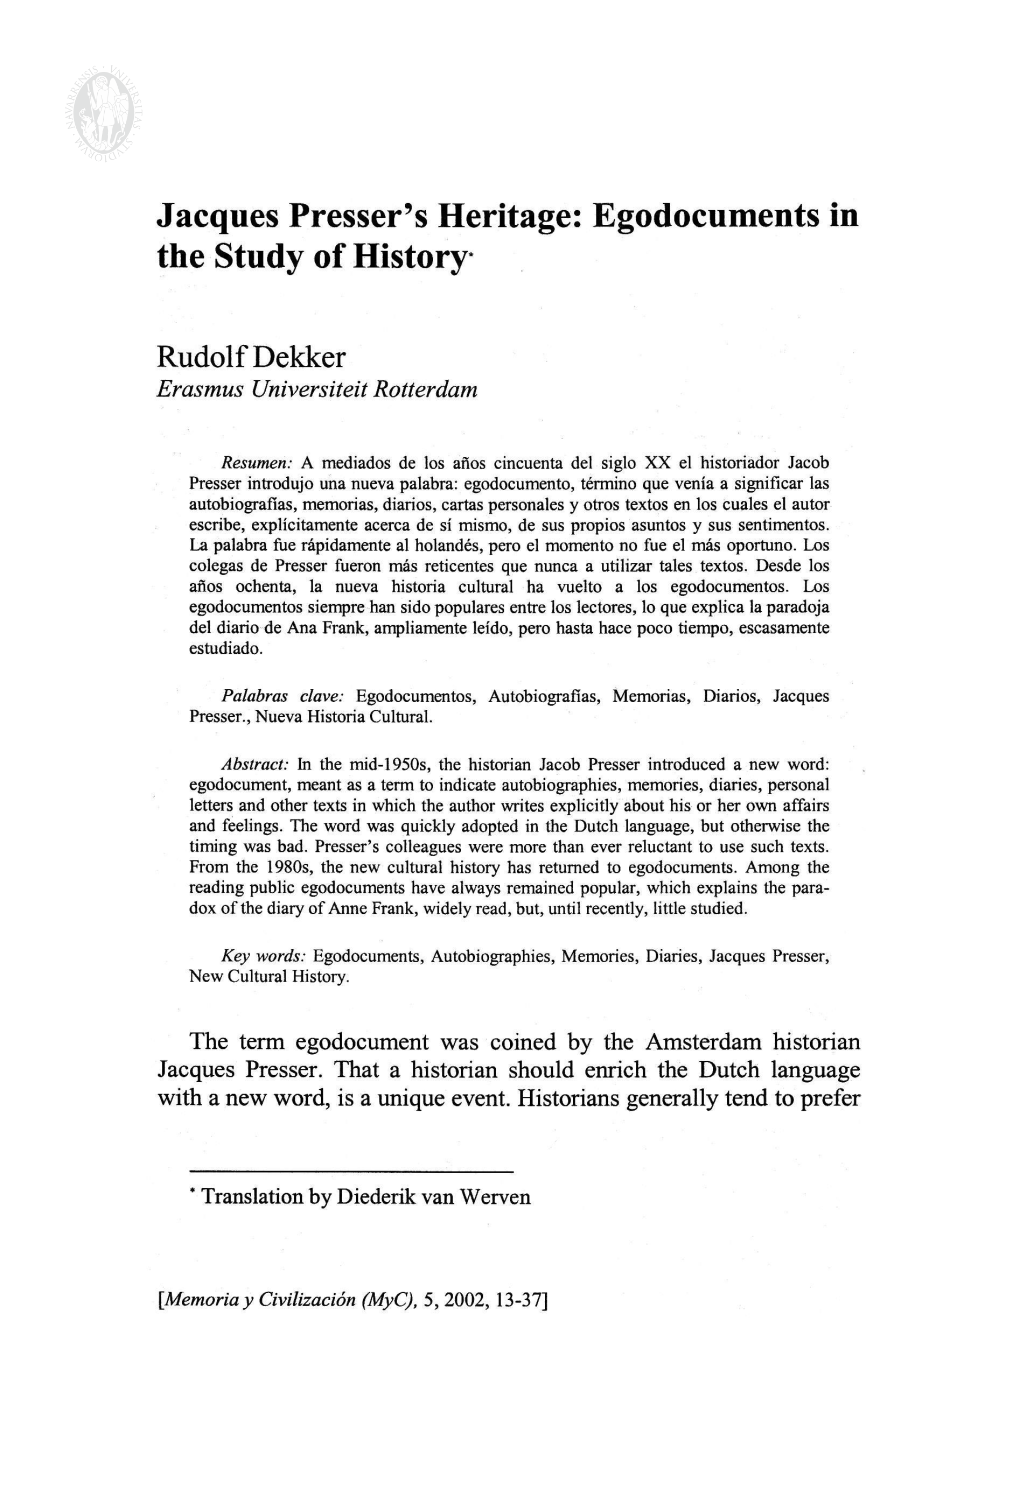 Jacques Presser's Heritage: Egodocuments in the Study of History*